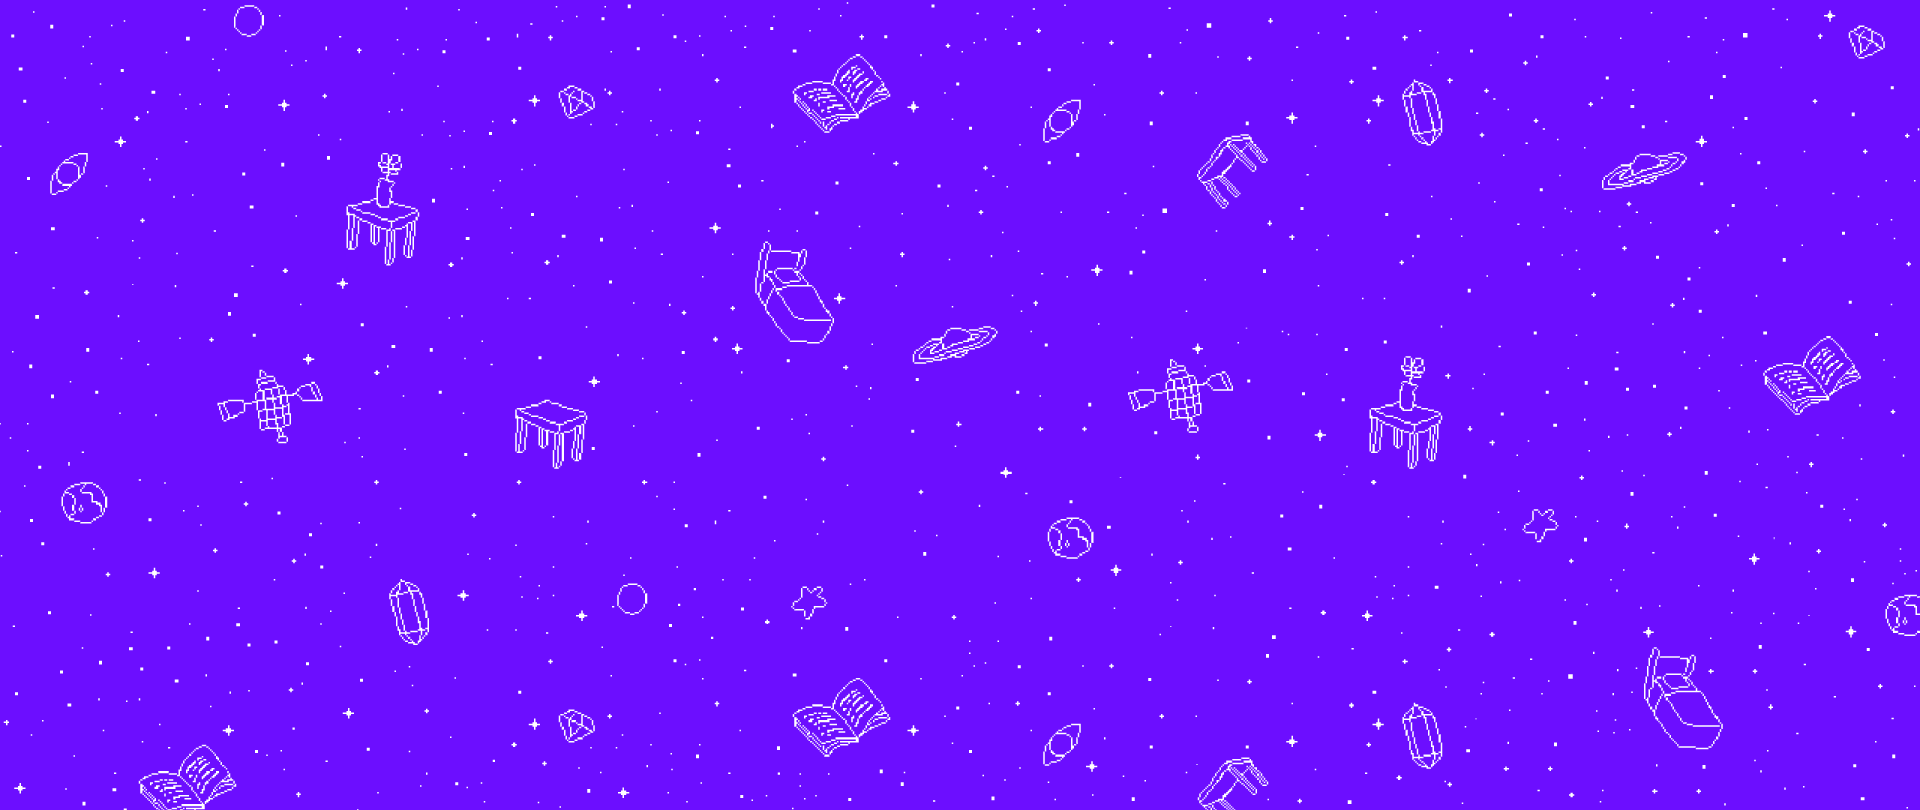 Omori (Video Game) HD Wallpaper and Background